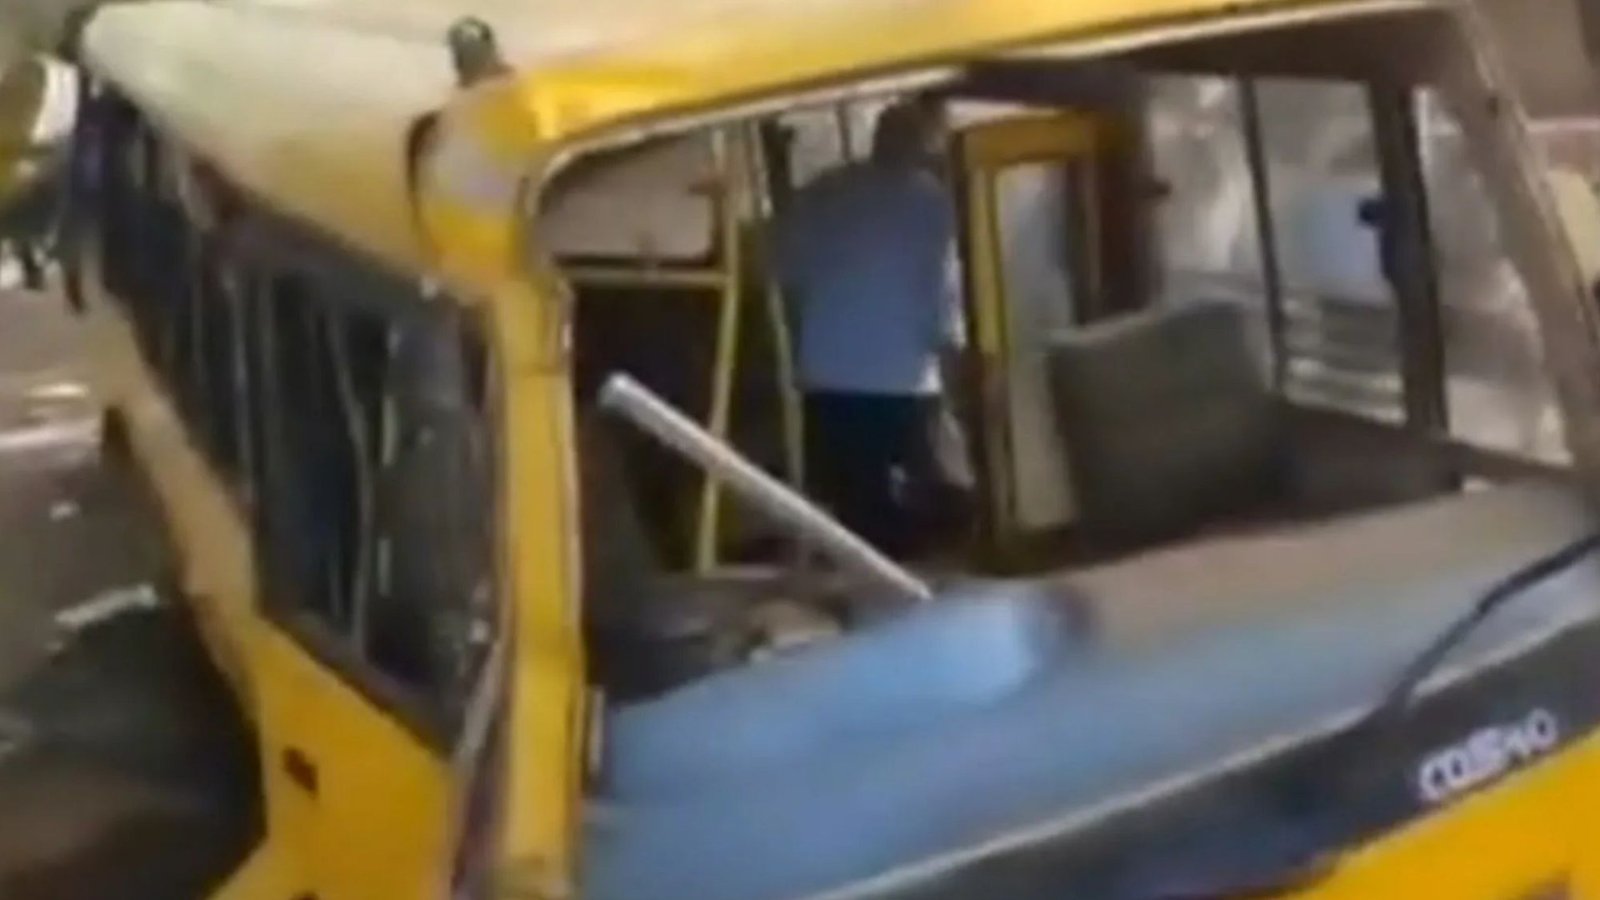 At least six children dead & 15 injured in horror school bus crash as ‘drunk’ driver overturns coach in India